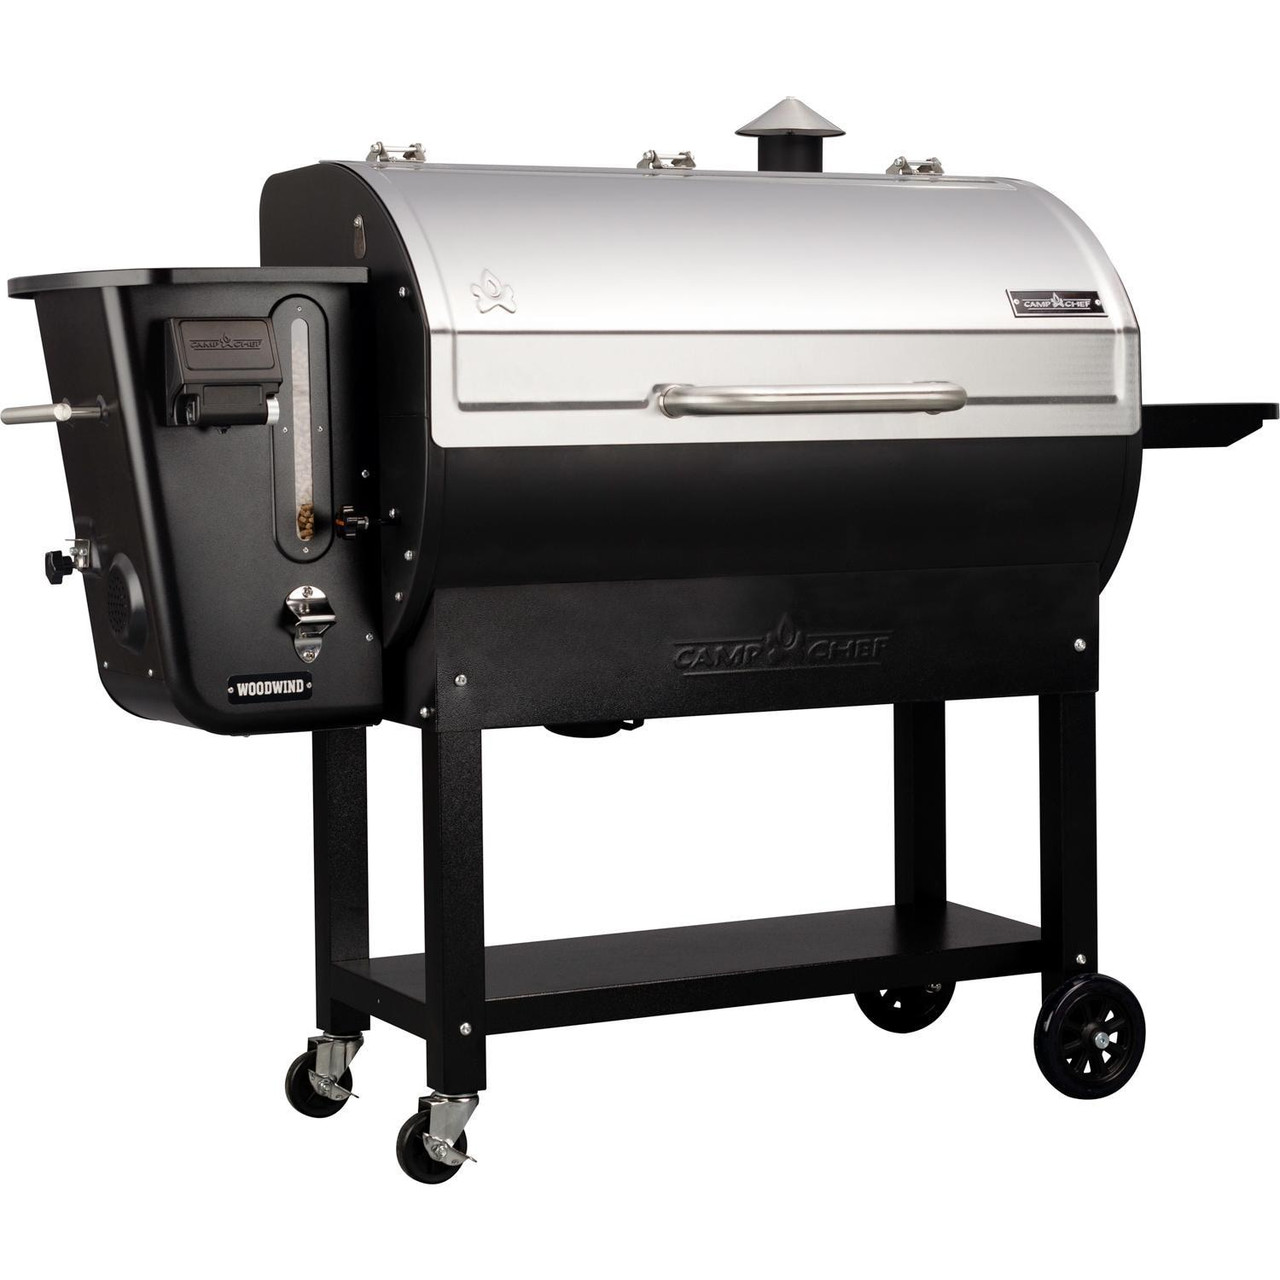 Camp Chef 36" Woodwind CL Pellet Grill With Wifi